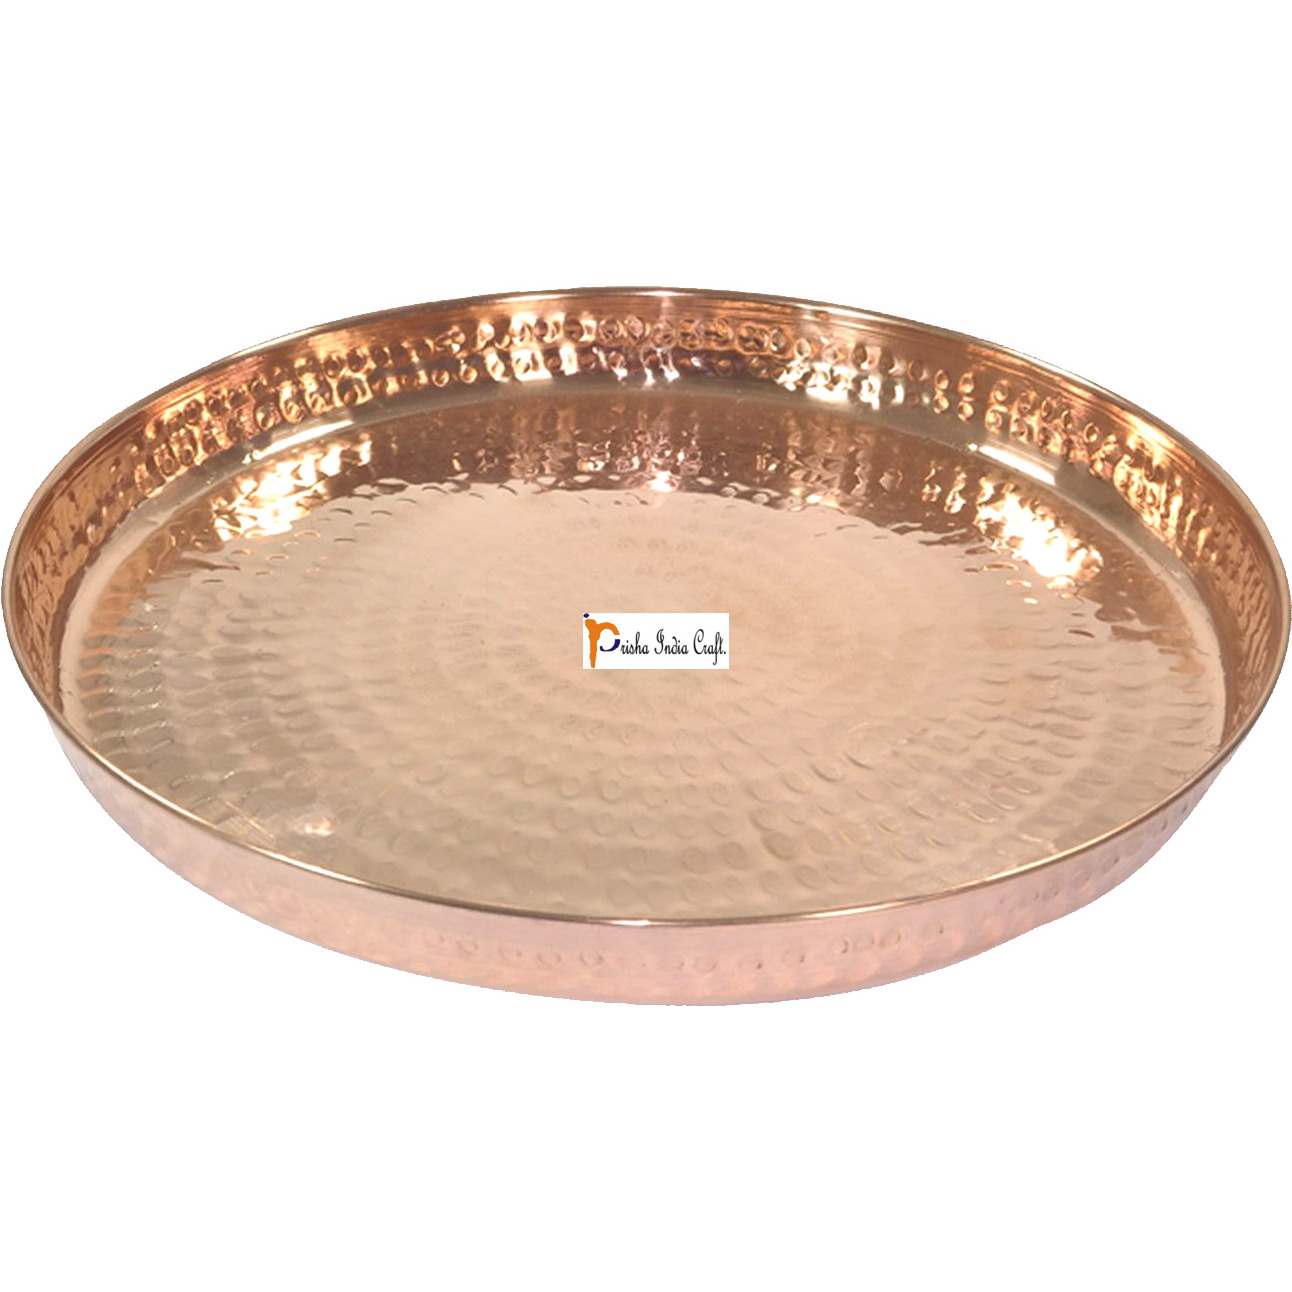 Set of 3 Prisha India Craft B. Indian Dinnerware Pure Copper Dinner Set Dia 12  Traditional Thali Set Dinner Set of Plate, Bowl, Spoons, Glass with Napkin ring and Coaster - Christmas Gift